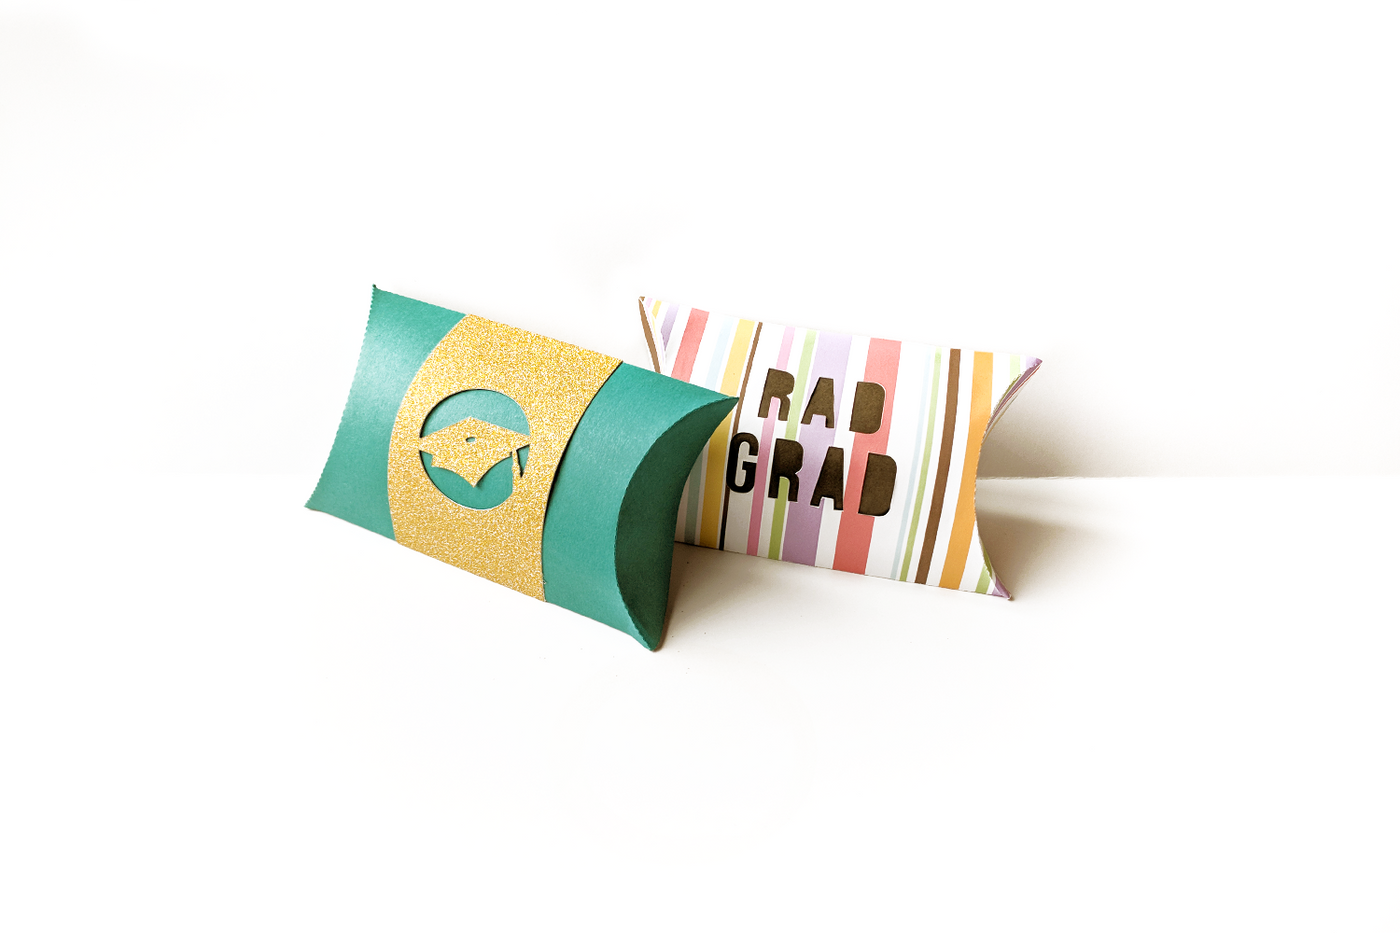 Two pillow boxes. One is turquoise with a gold band that has a grad cap cutout. The other is striped with cutout text reading "Rad grad."